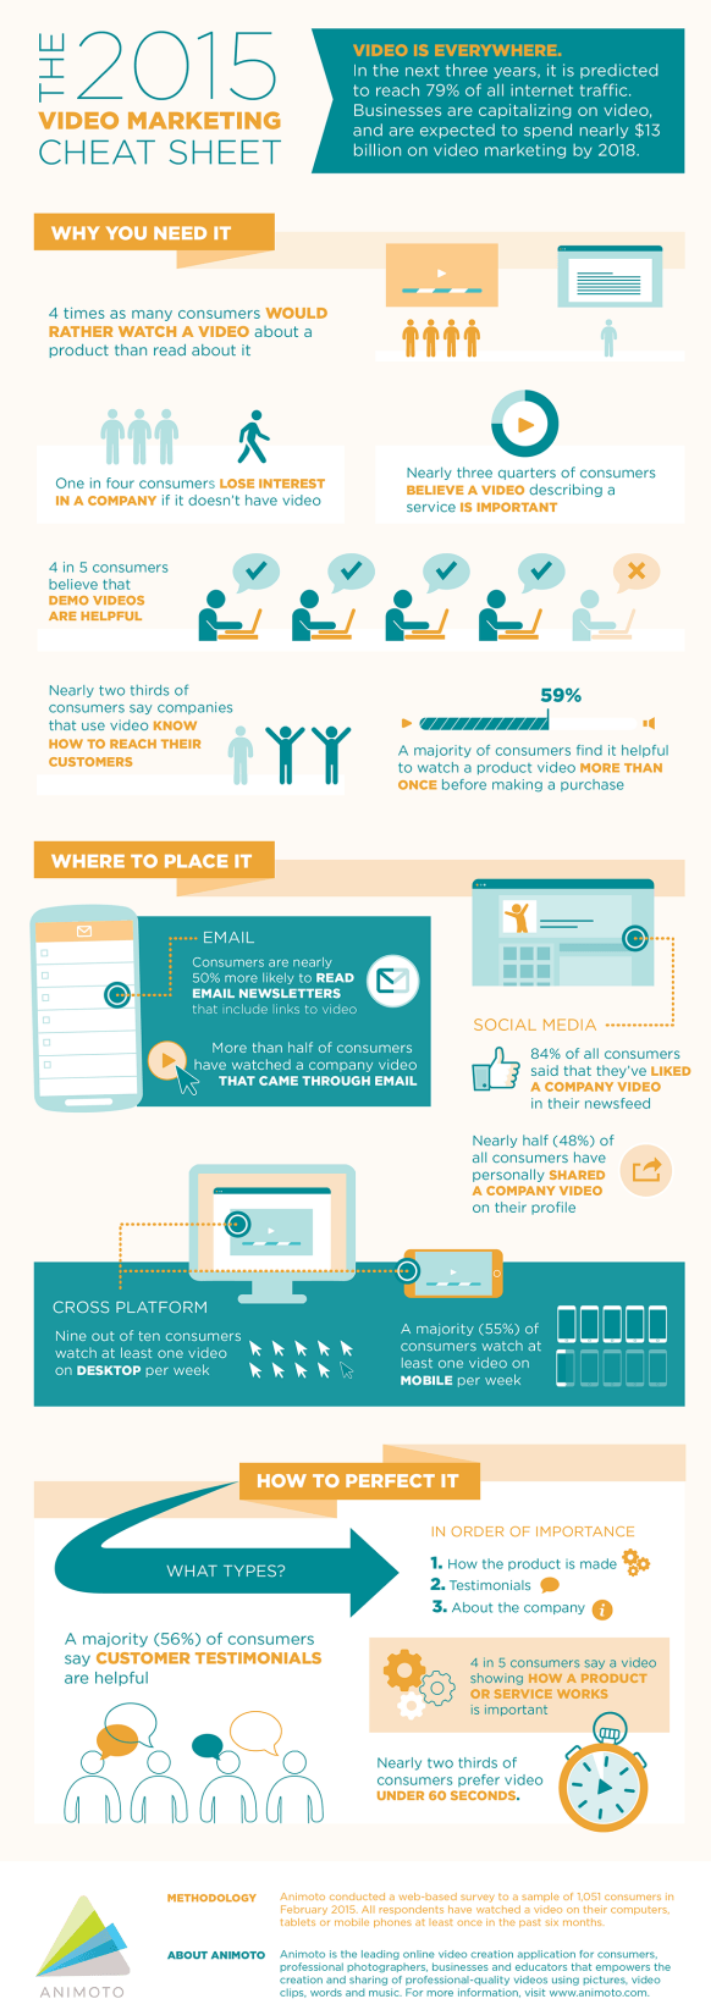 [Infographic] Video for Business: A Necessity